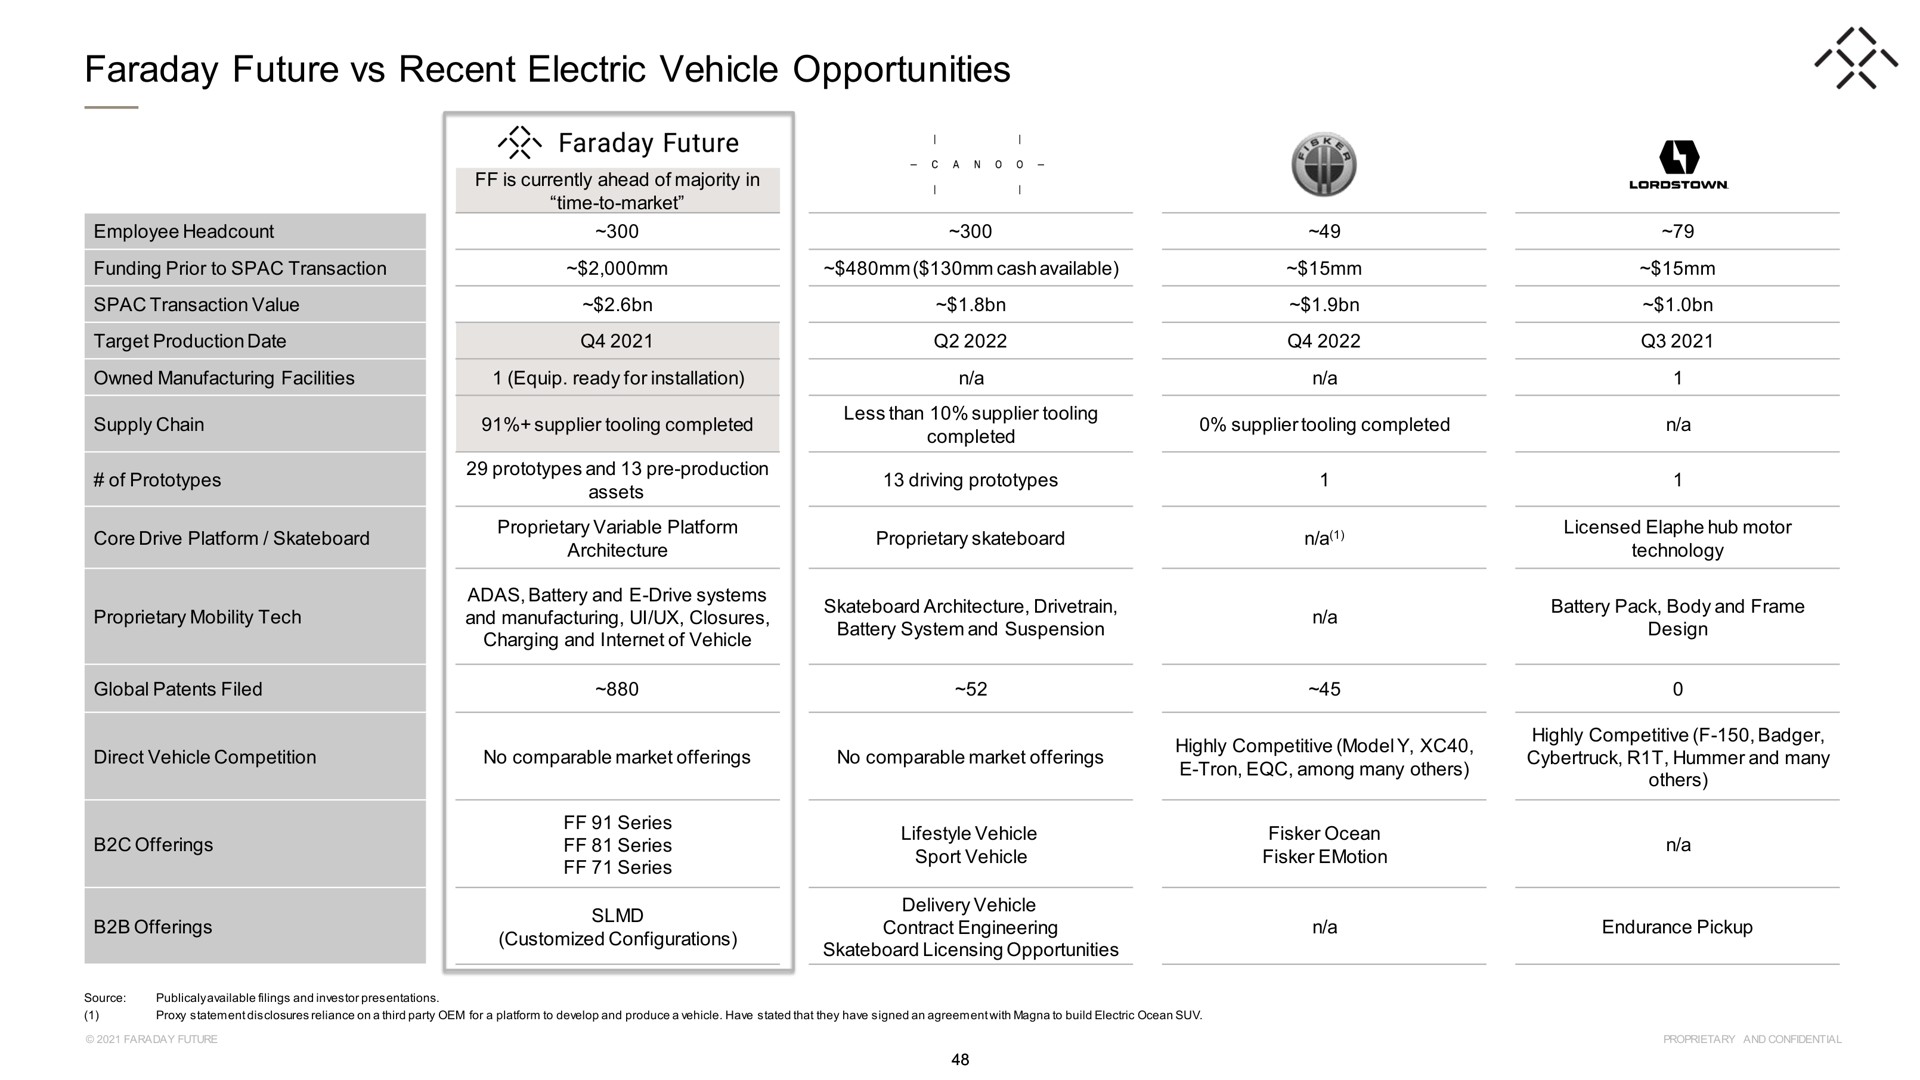 faraday future recent electric vehicle opportunities | Faraday Future